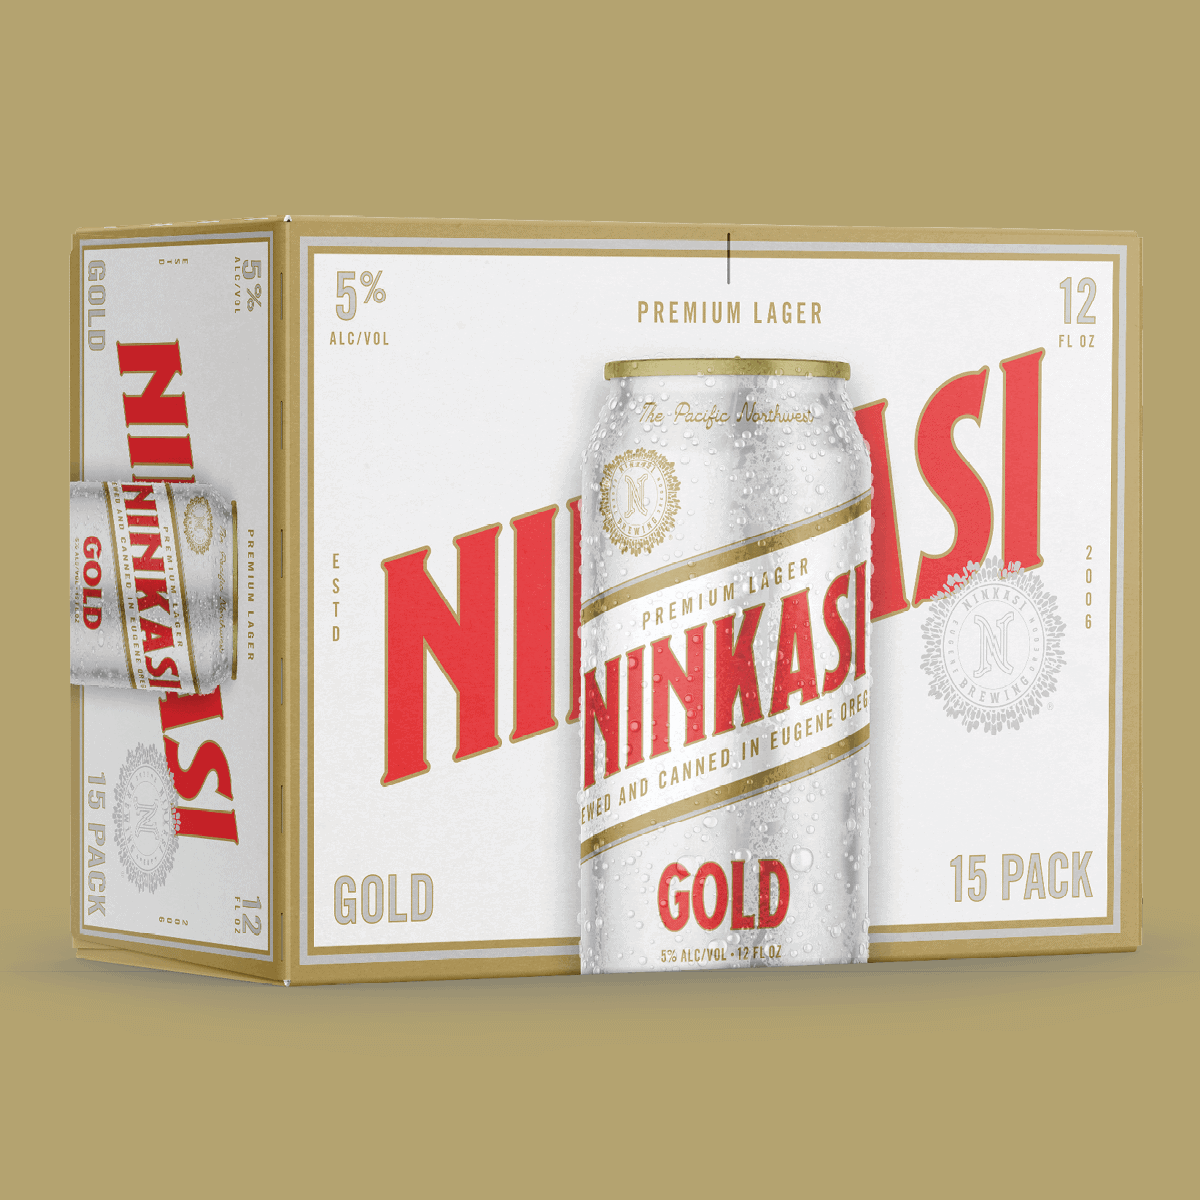 The image shows a 15-pack box of Ninkasi Gold Premium Lager. The packaging is primarily an off-white color with bold red and gold accents. The Ninkasi logo is prominently displayed in red, with "Gold" written underneath in a large, elegant script. A tagline "The Pacific Northwest" is visible above the logo, emphasizing the beer's regional roots. There's a depiction of a beer can in the center, with water droplets on it, indicating it's chilled. The beer is described as "PREMIUM LAGER" and "BREWED AND CANNED IN EUGENE, OREGON" as per the text below the can image. The alcohol by volume is noted as "5%" and the can size as "12 FL OZ". The background has a slight texture, giving it a premium feel, and the left side of the image subtly shows "15 PACK" indicating the quantity within the box.